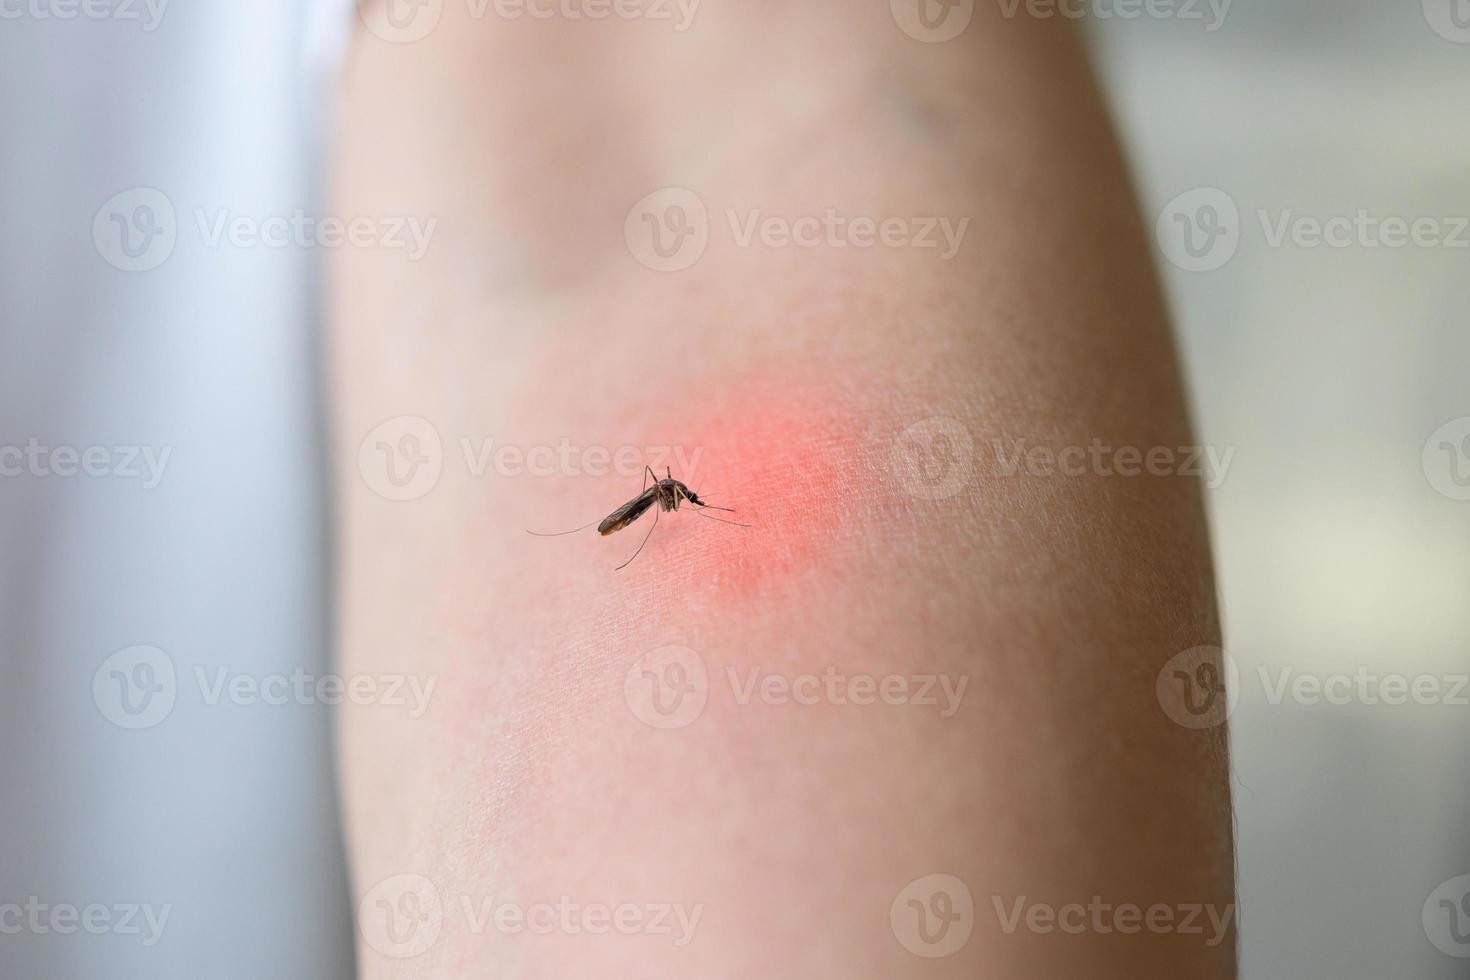 Mosquito bite on adult arm with skin rash and allergy with red spot photo